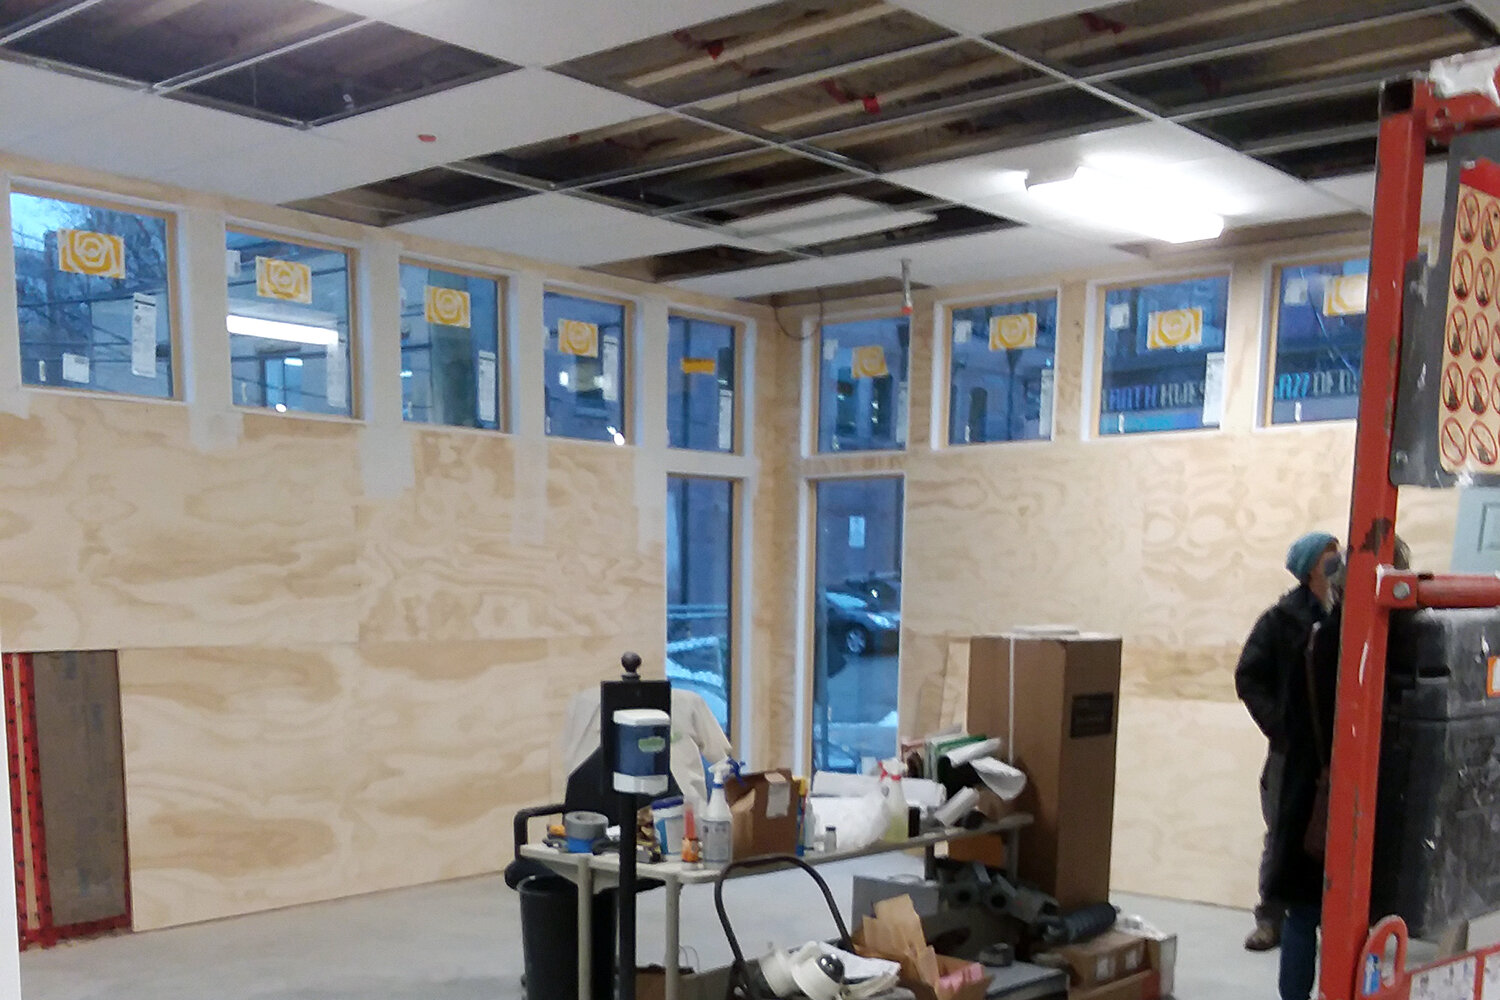 Inside the addition, plywood is up on the walls